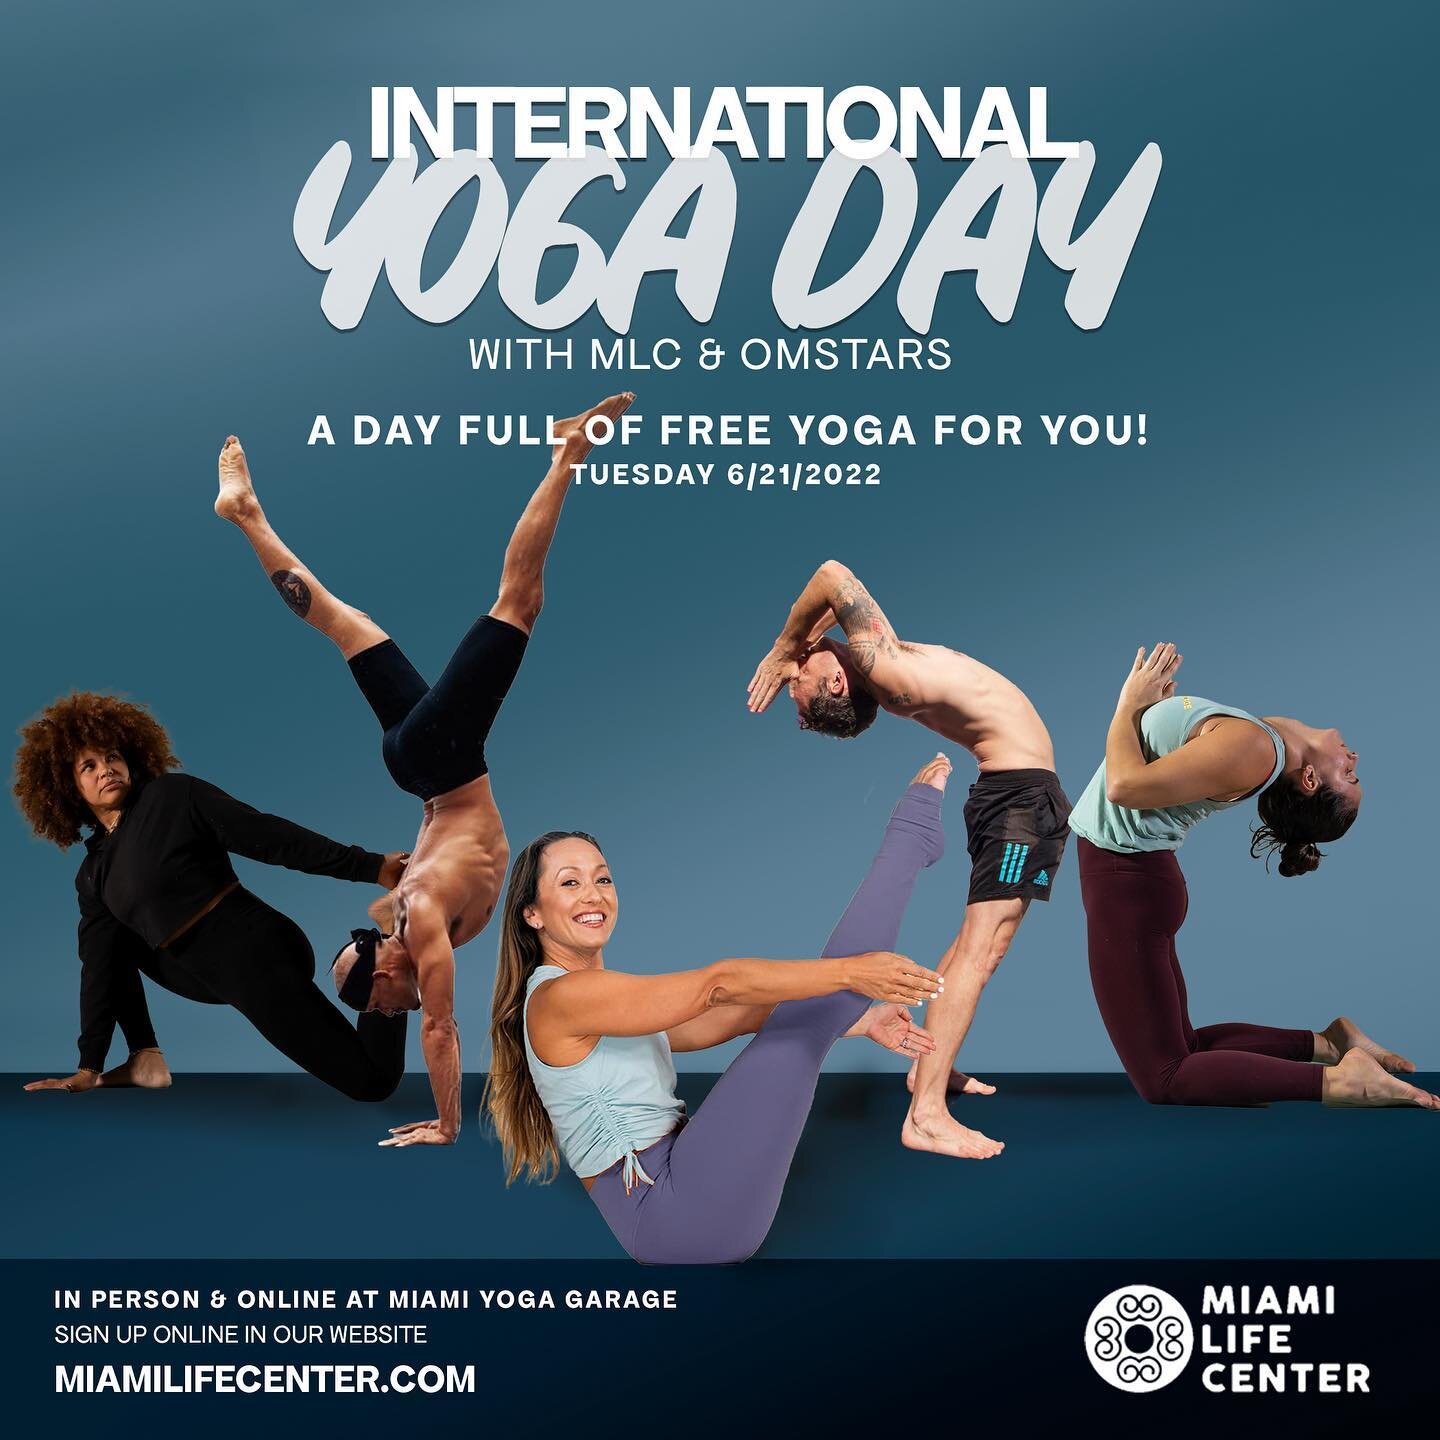 On Tuesday, June 21st, Miami Life Center and Omstars are happy to bring you a full day of free classes and events to celebrate International Yoga Day.
All of our guided classes listed on the schedule will be totally free, and instead we&rsquo;ll be c